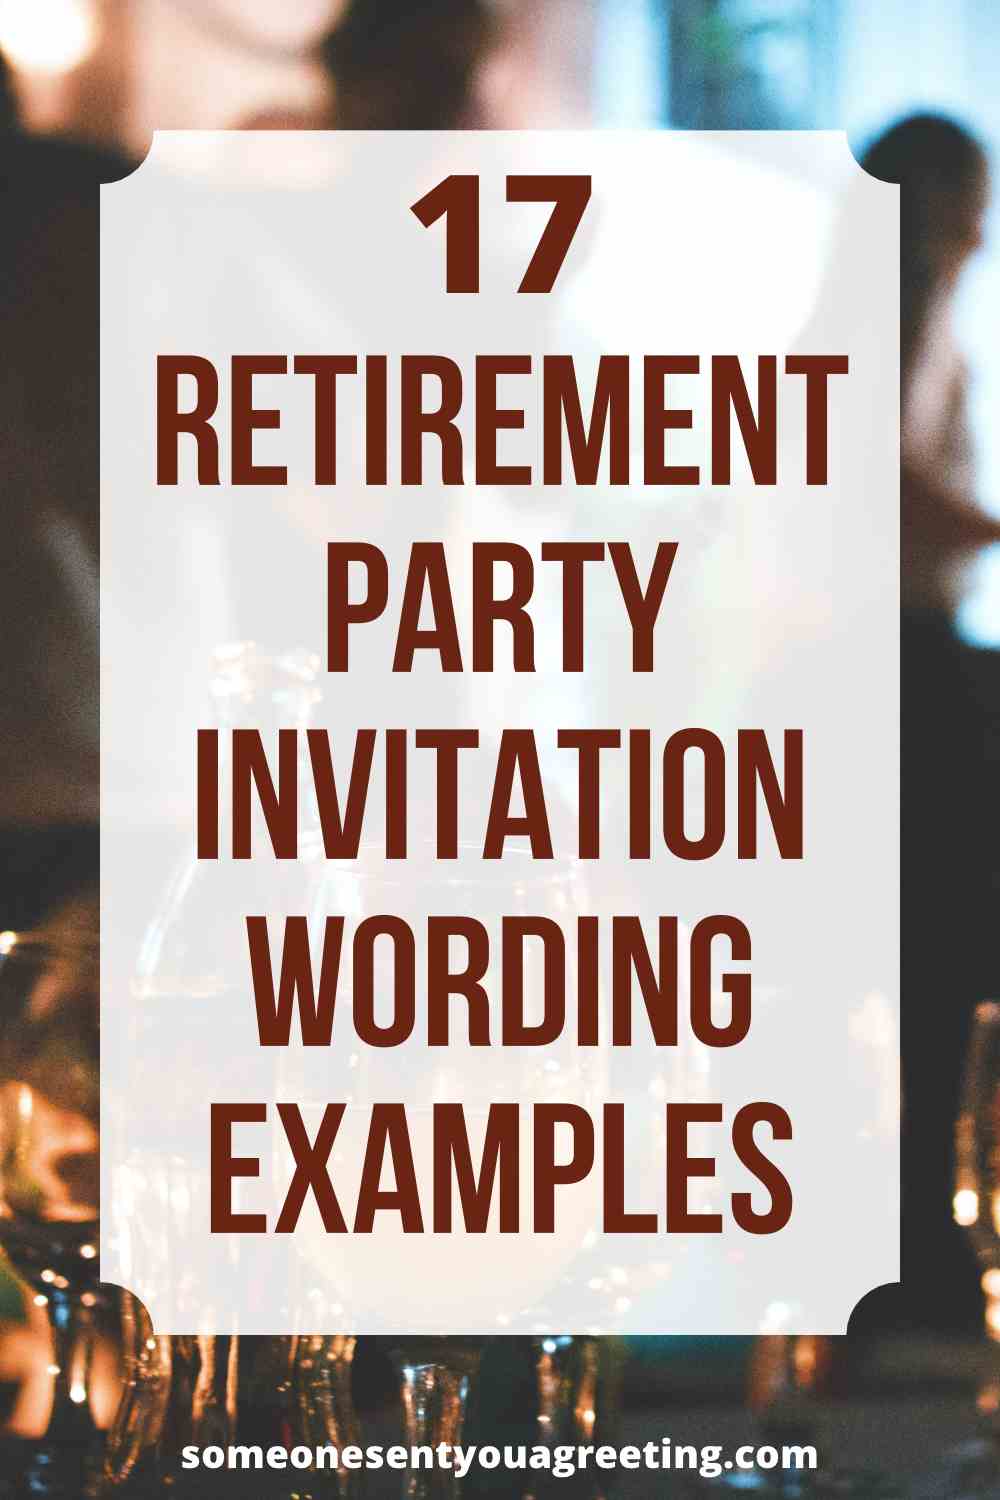 17-retirement-party-invitation-wording-examples-someone-sent-you-a